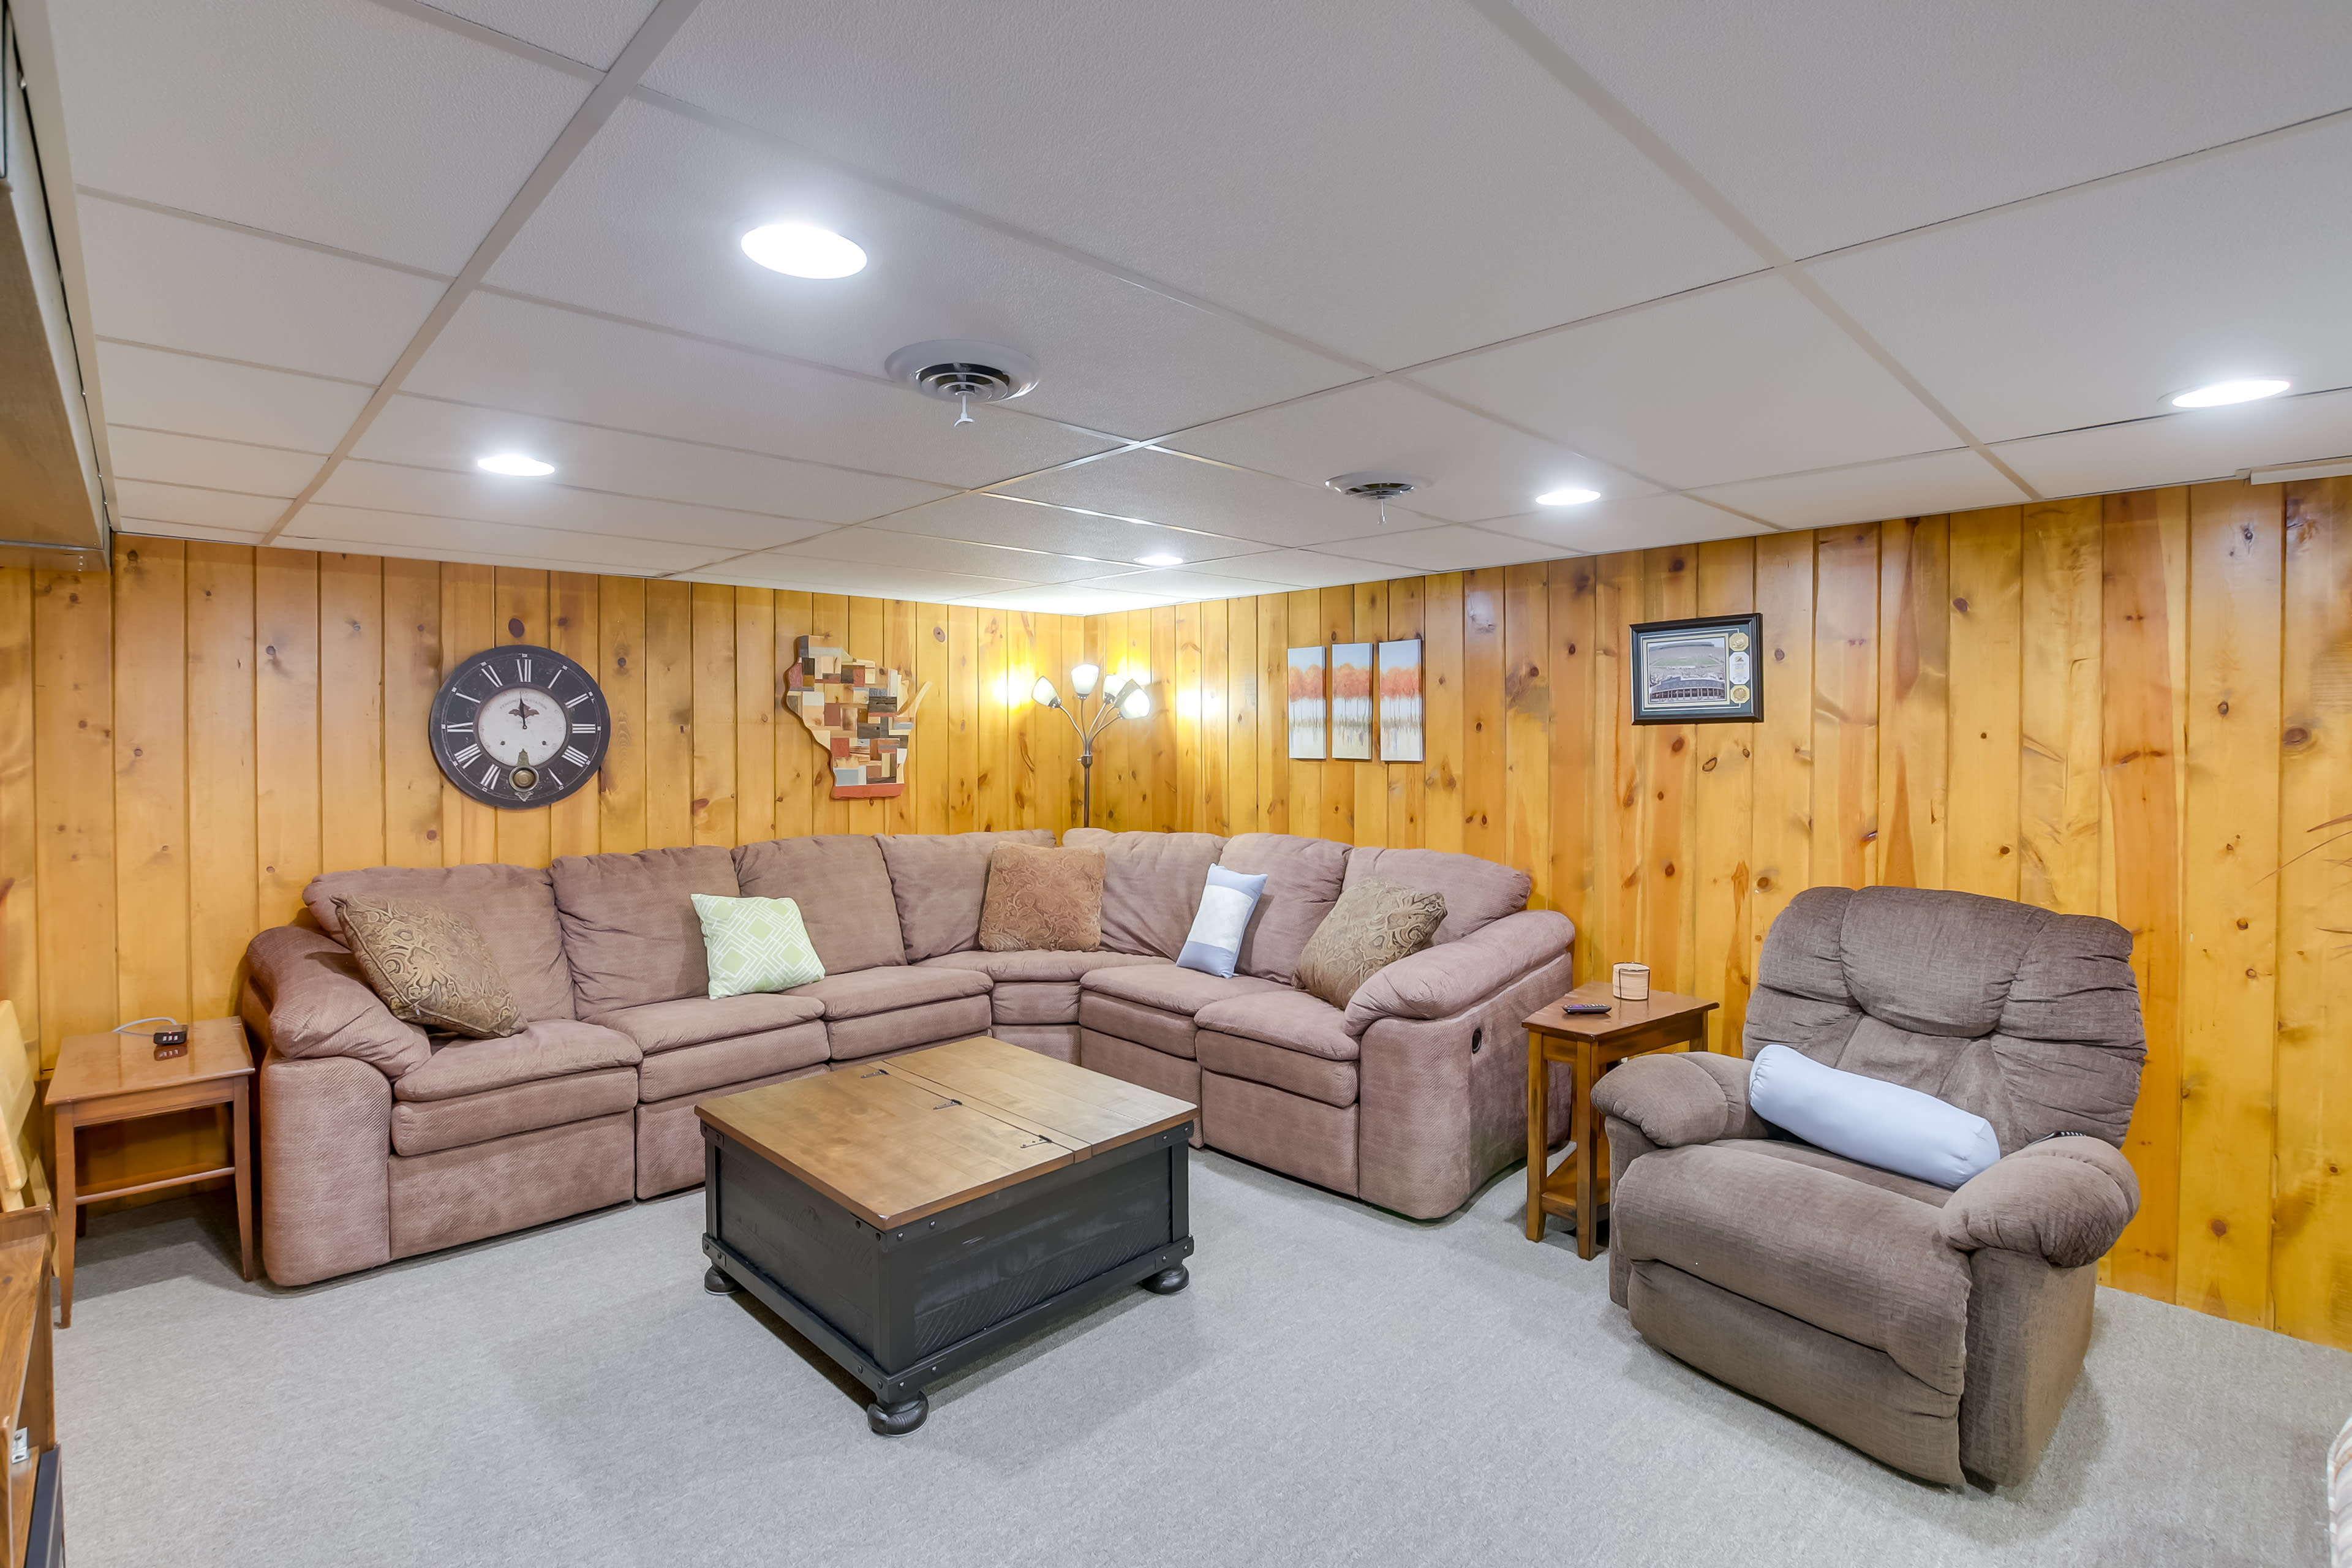 Finished Basement | Smart TV | Board Games & Puzzles | Sleeper Sofa